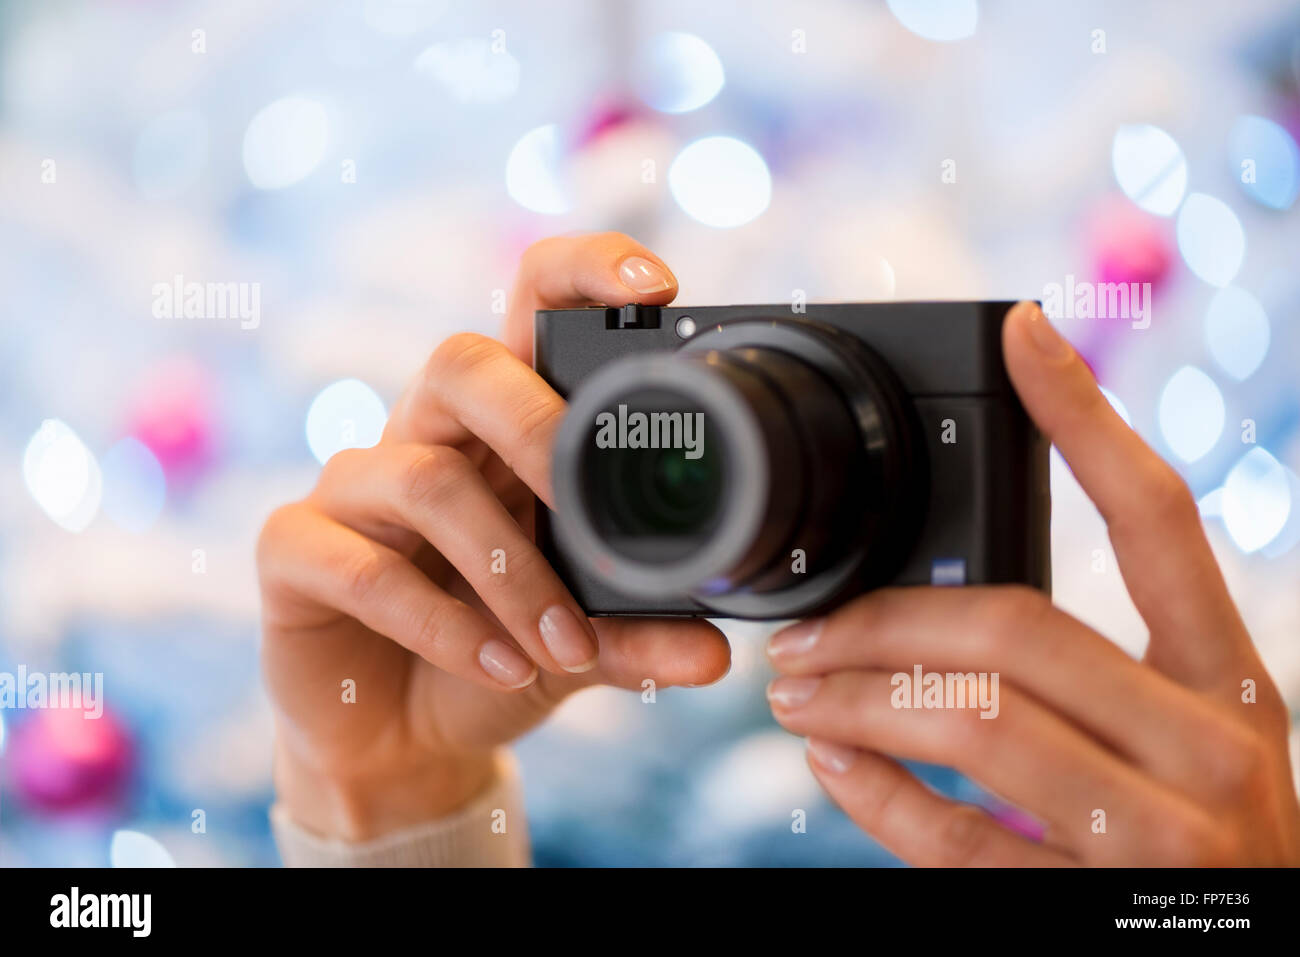 Woman takes a picture with a compact photo camera in front of a Christmas tree Stock Photo